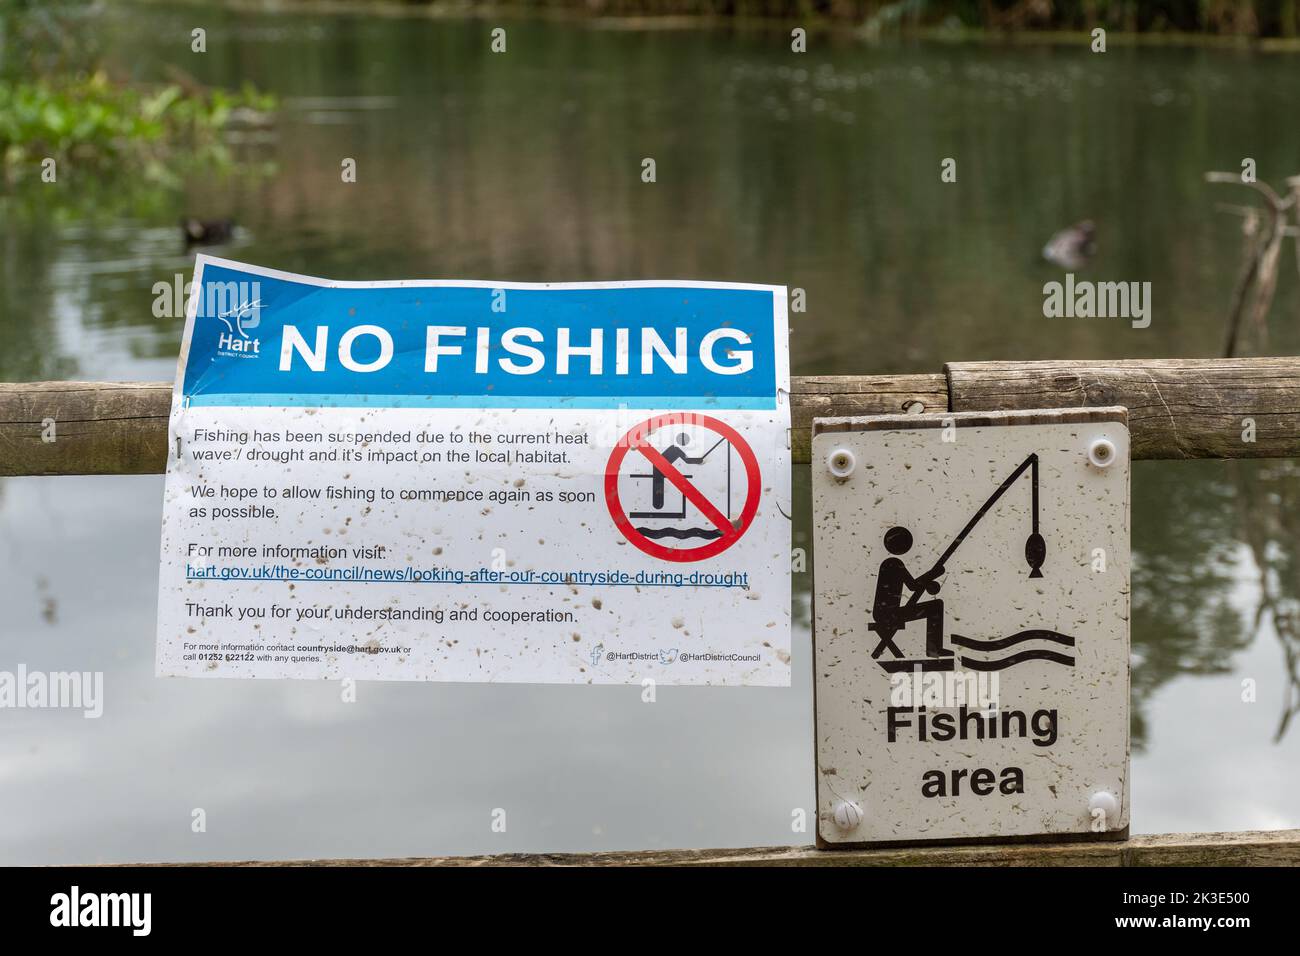 No fishing sign at a fishing area at Fleet Pond in summer 2022 due to low water levels caused by drought and heatwaves, Hampshire, England, UK Stock Photo